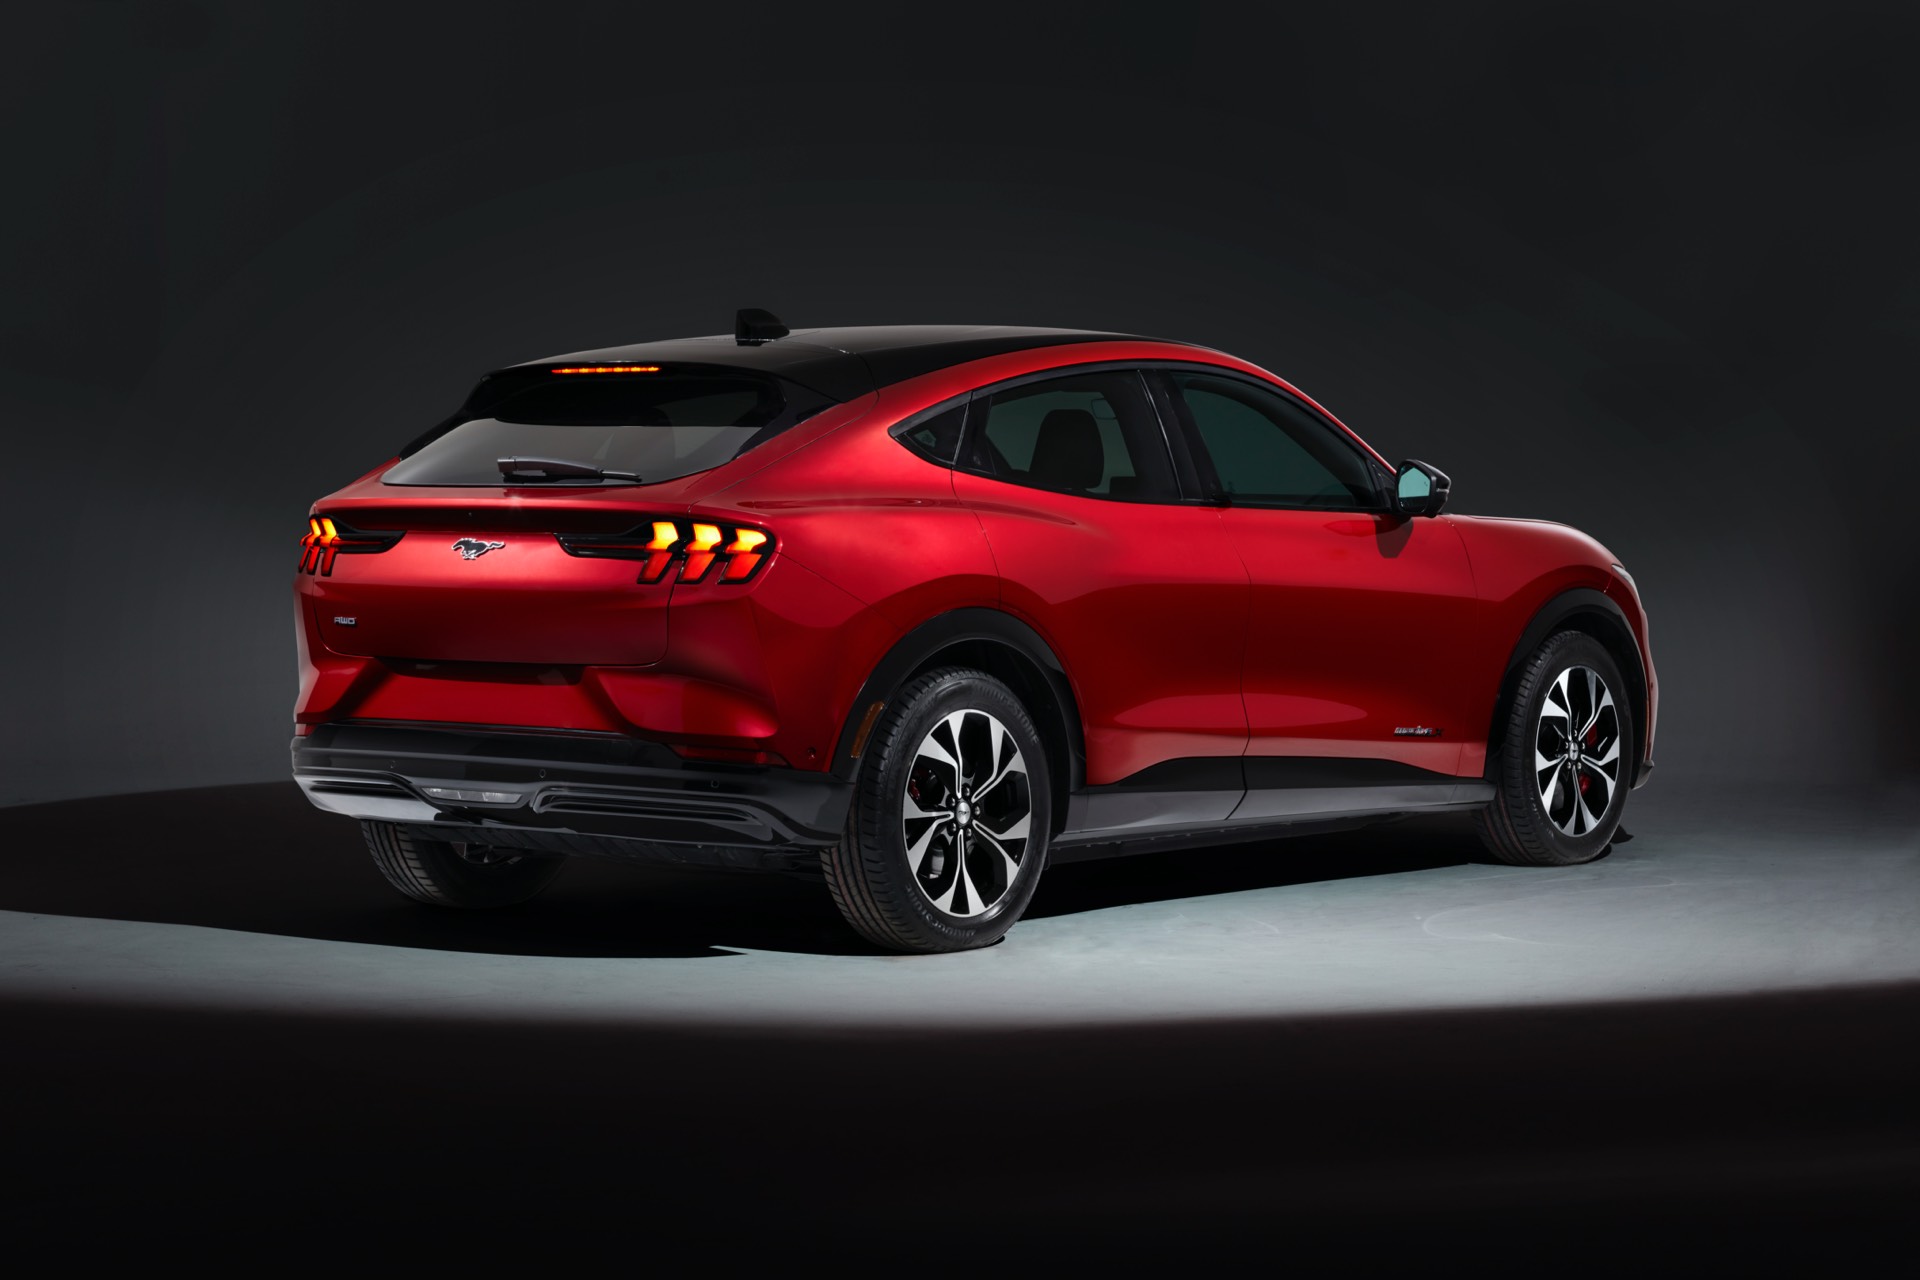 2020 Ford Mustang Mach 1 Suv